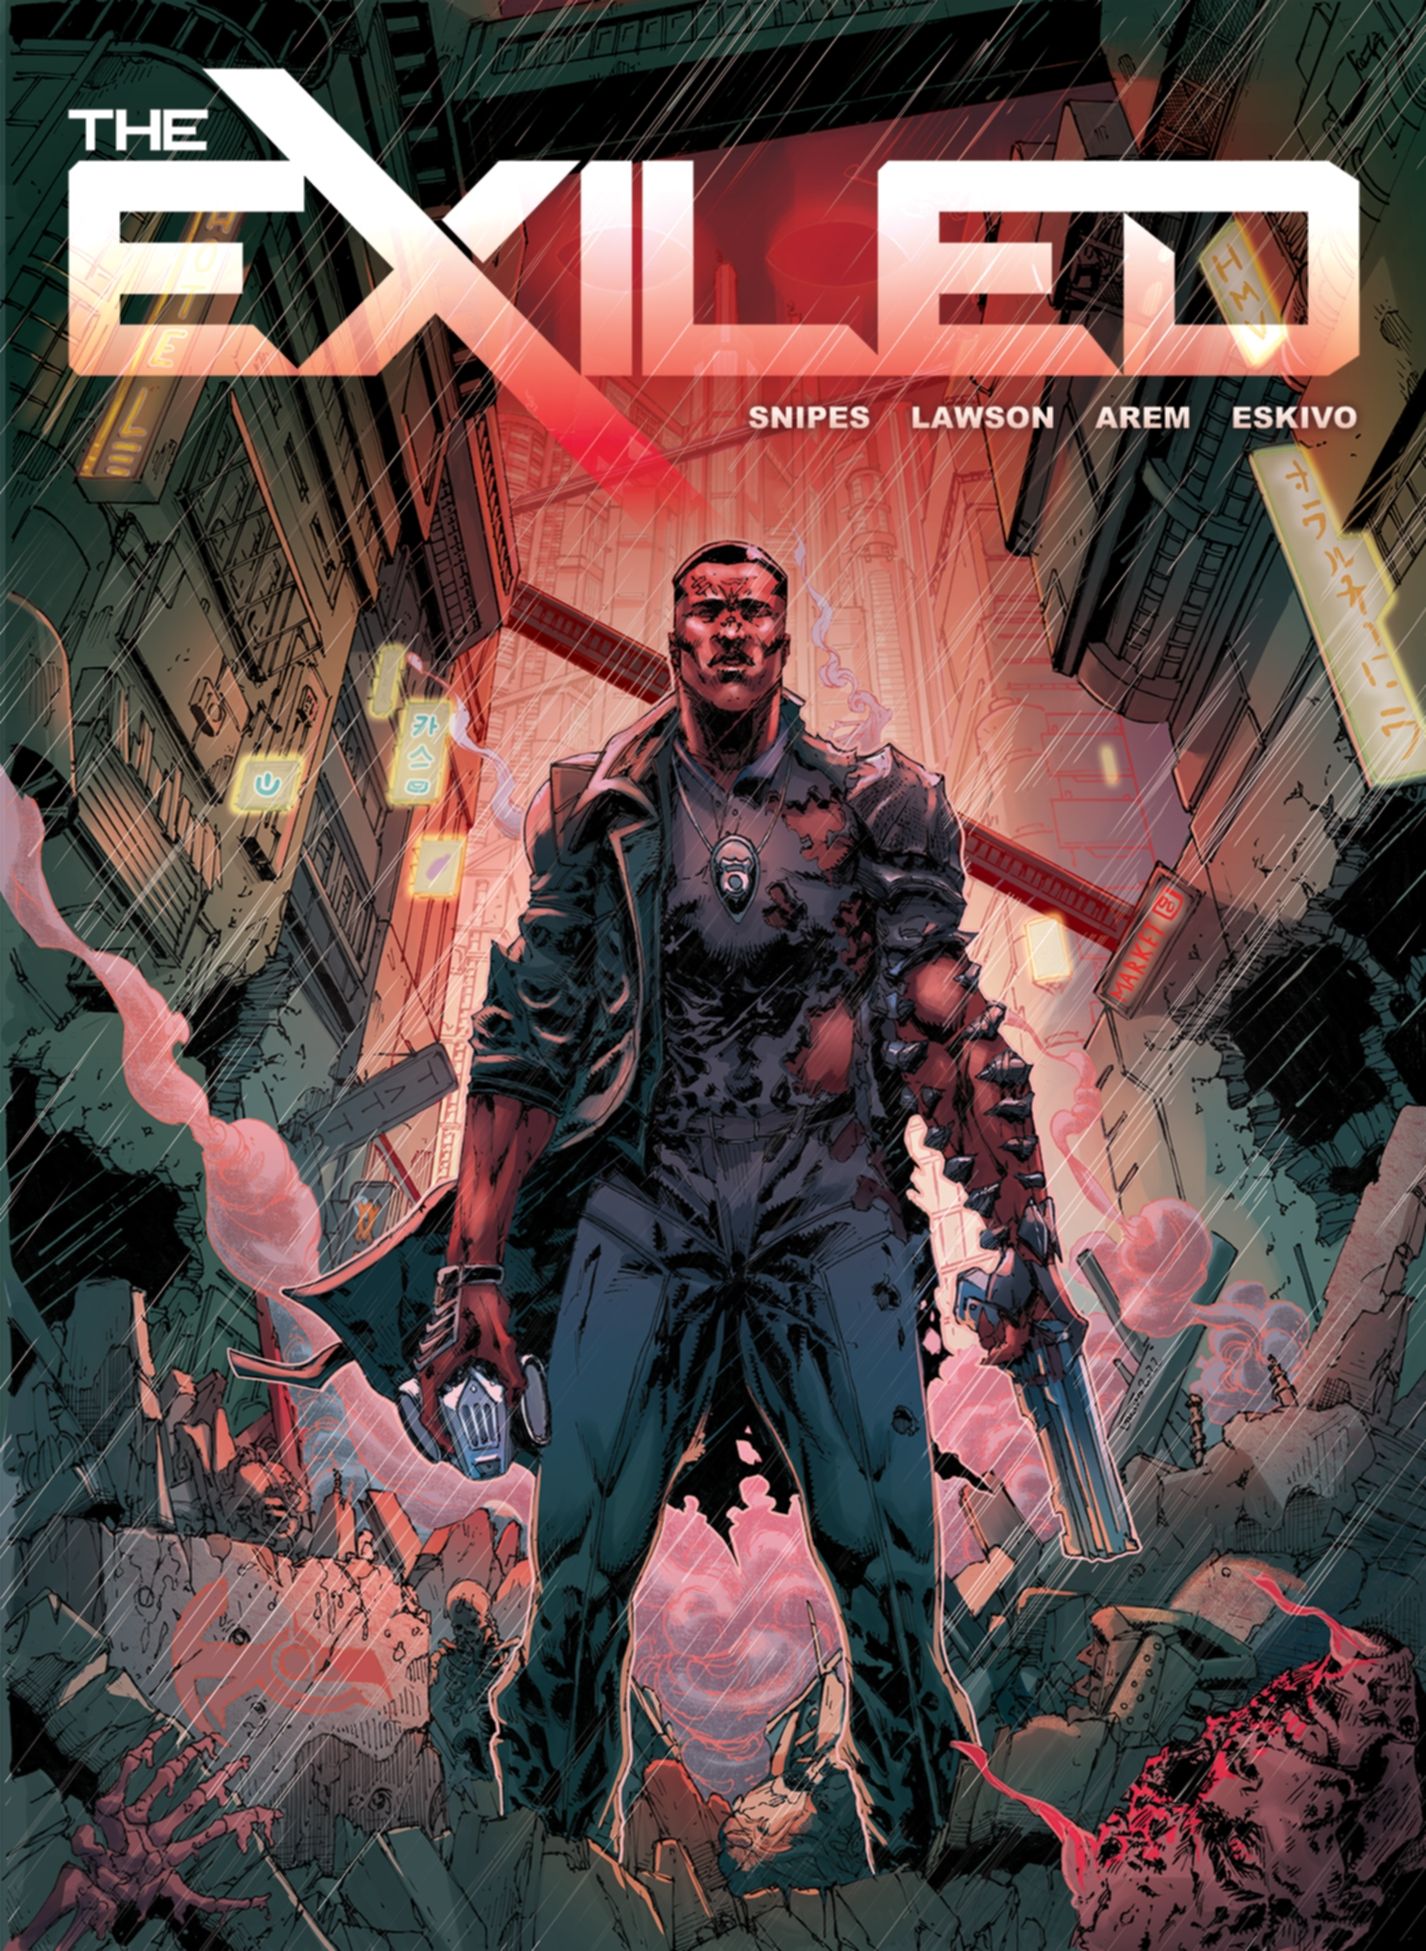 Wesley Snipes The Exiled Graphic Novel Cover